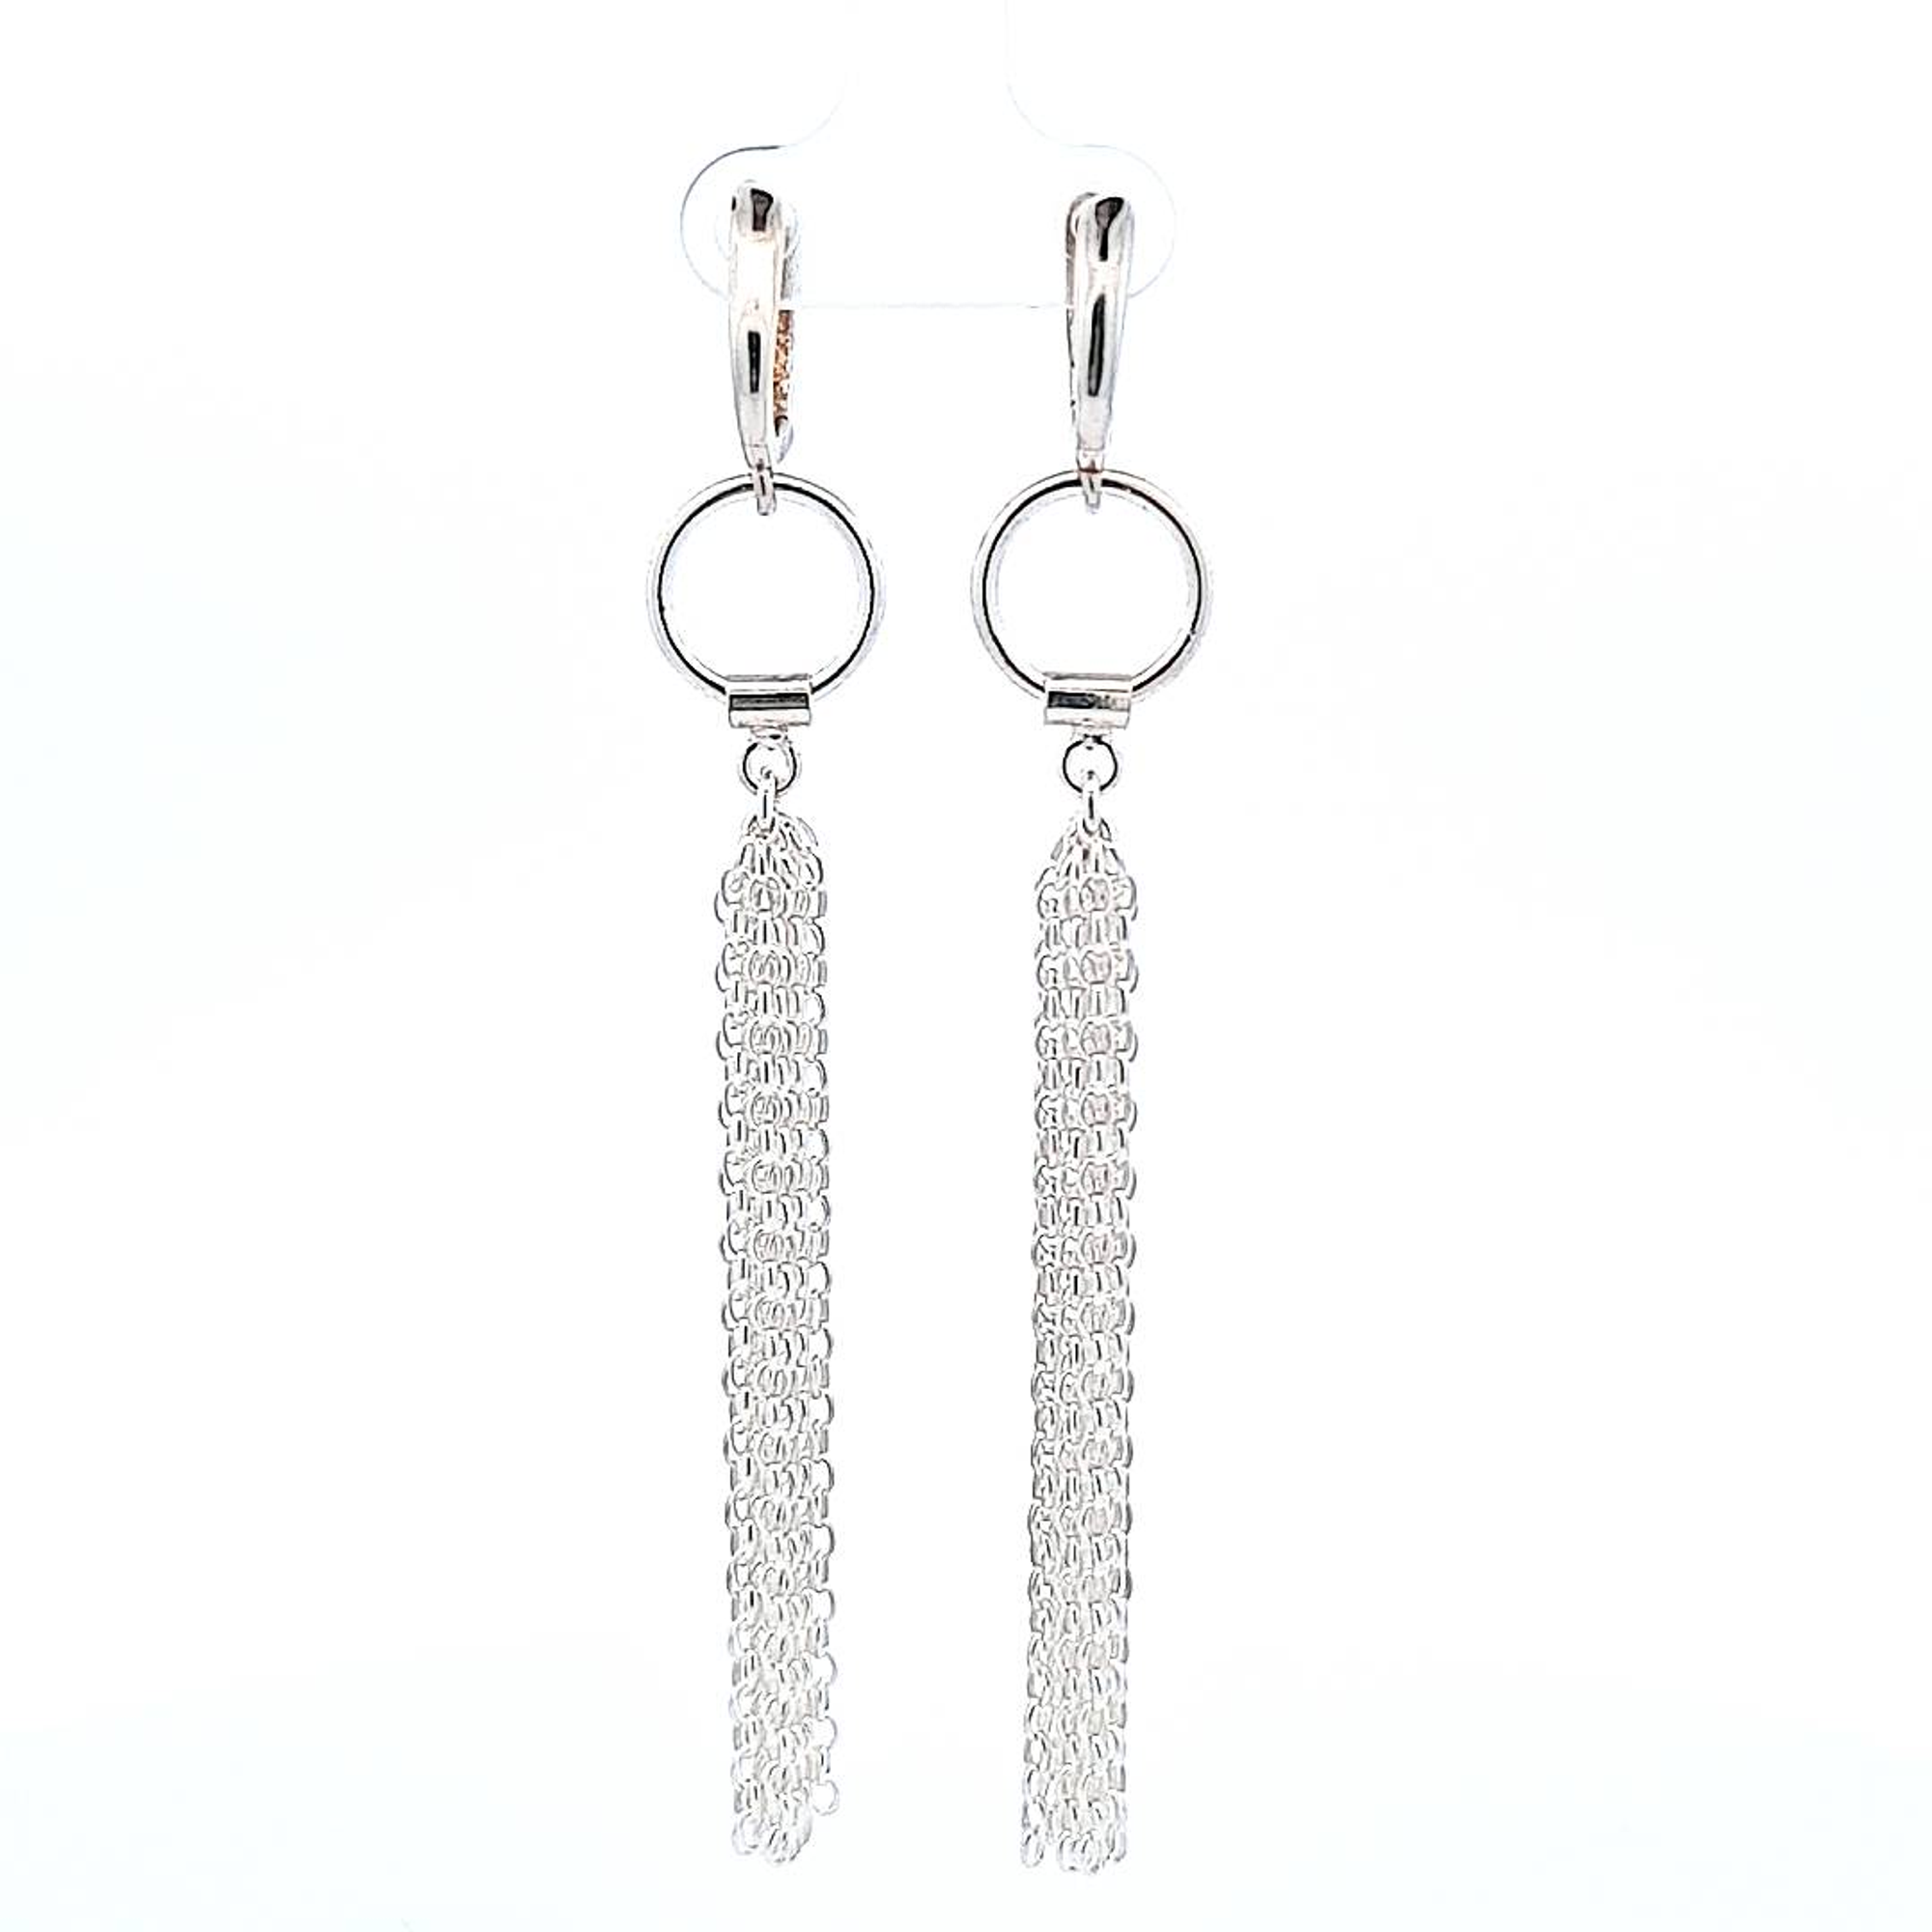 Elegant sterling silver waterfall tassel earrings by Magpie Gems, reflecting light with delicate chains.